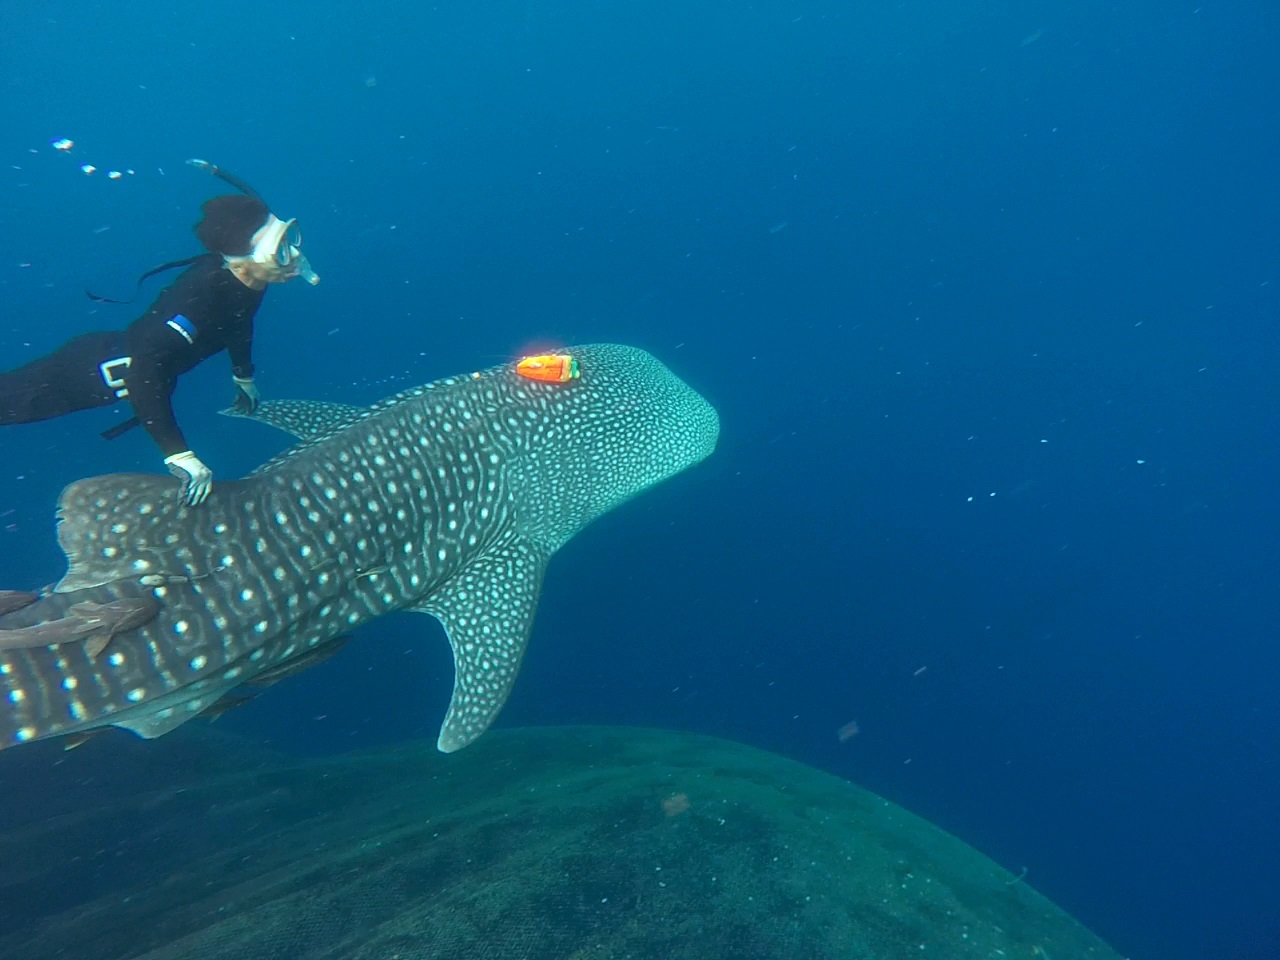 The whale sharks were released into the wild,were attached behavioral records and thermometers.